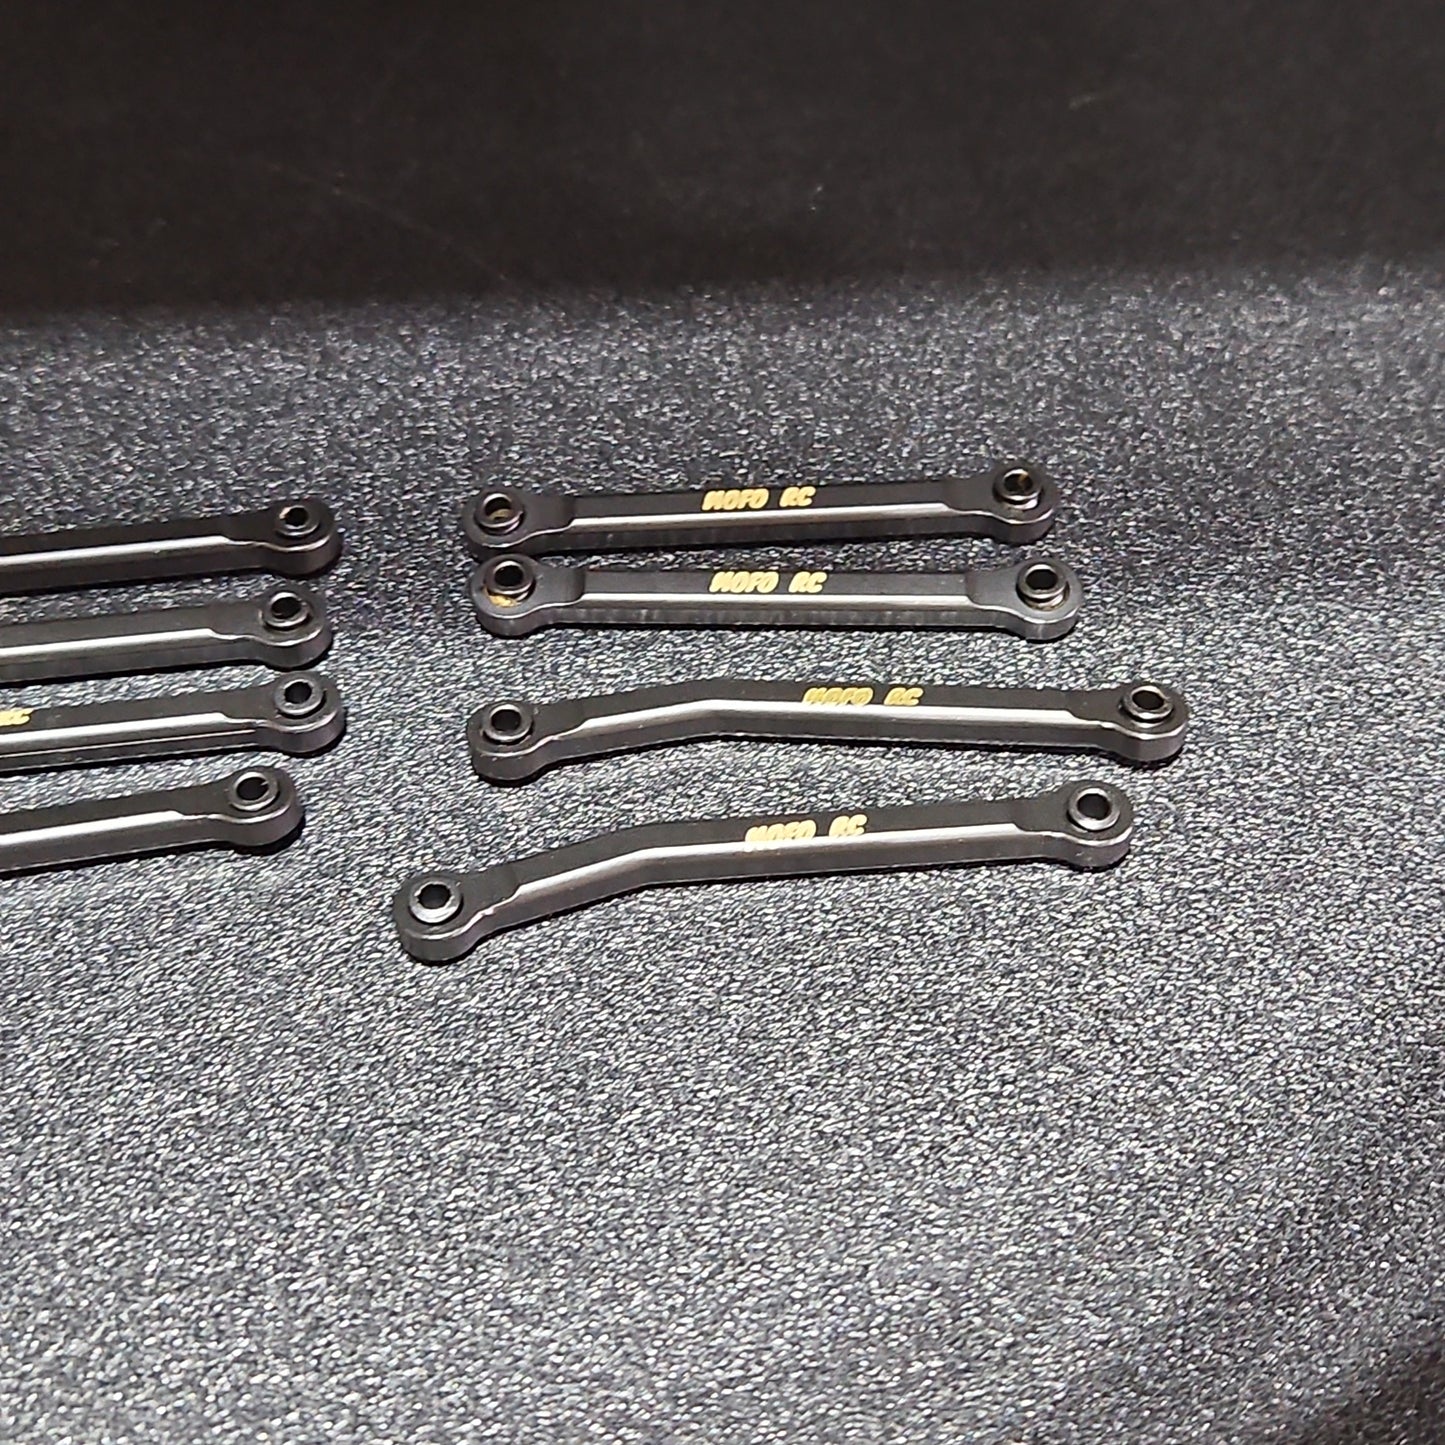 Black Brass High Clearance 4 link kit for Trx4-m